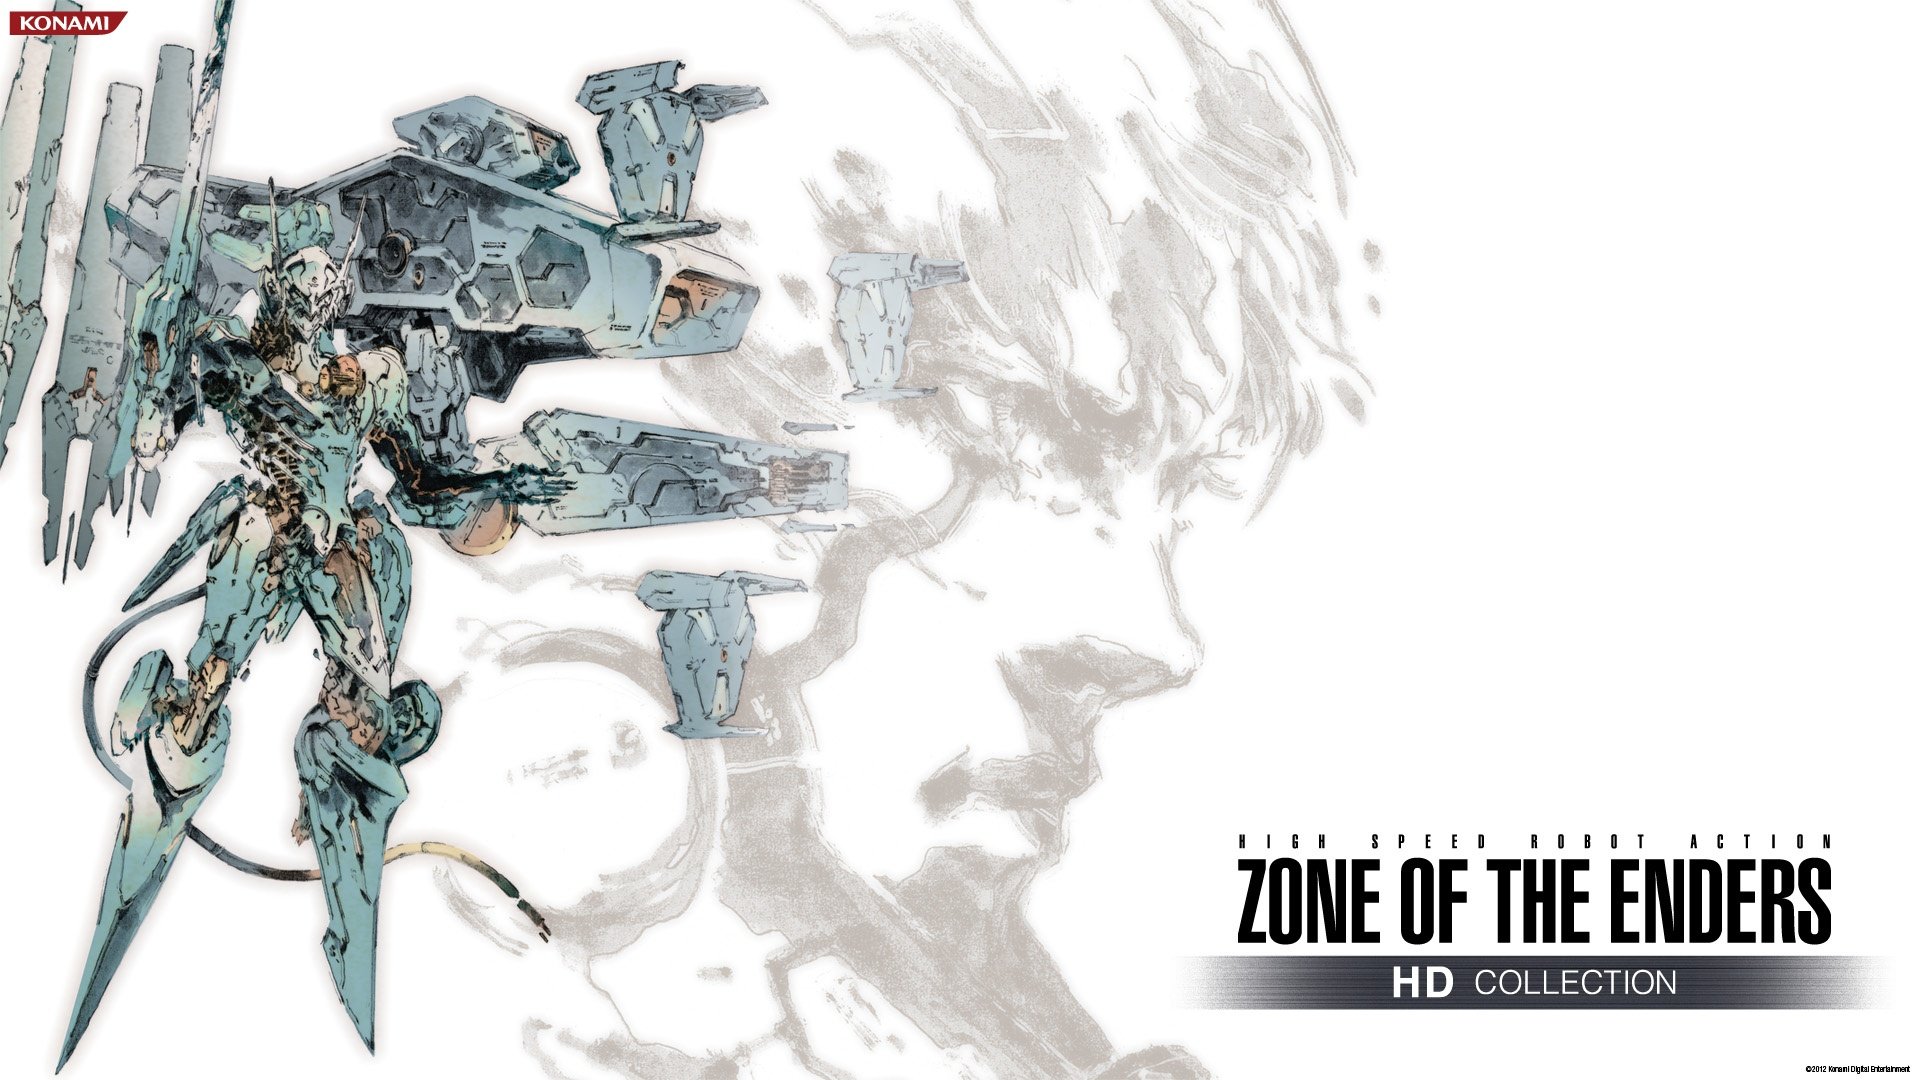 zone, Of, The, Enders, Zoe, Sci fi, Action, Mecha, Fighting Wallpaper